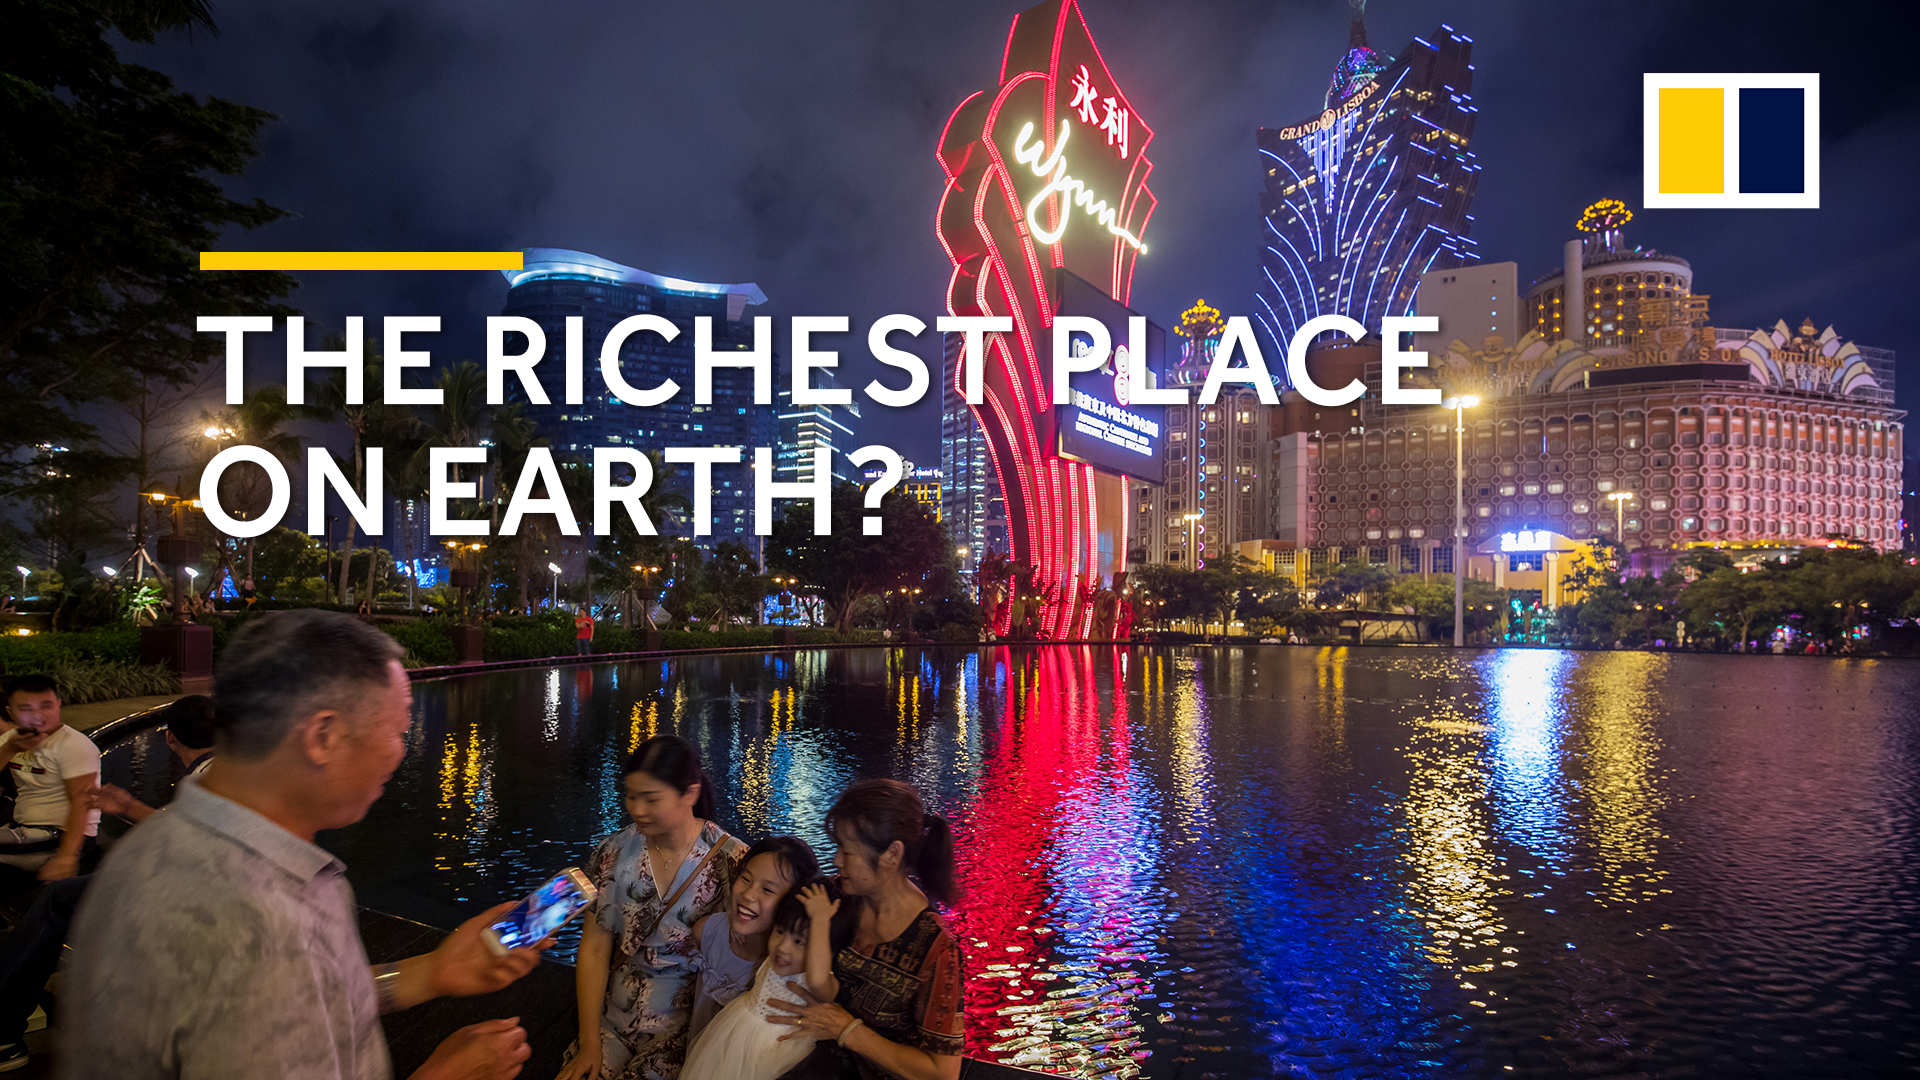 Welcome to the Richest place on Earth in Australia.